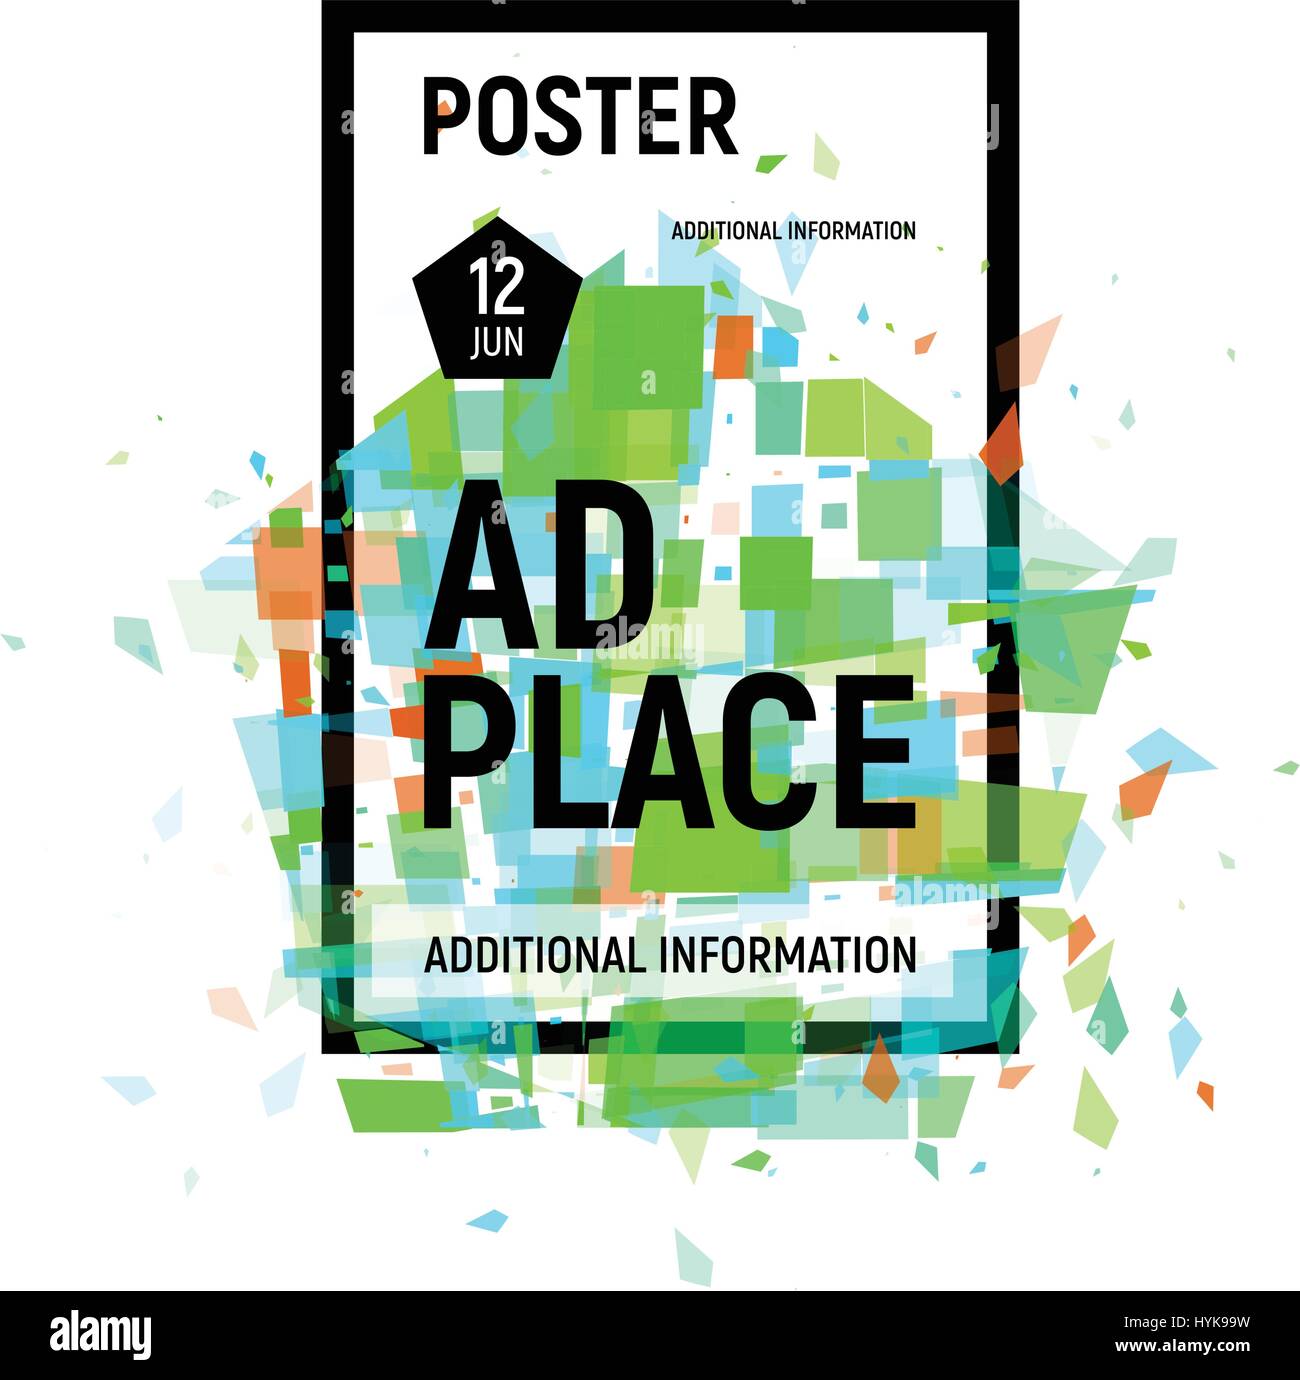 Isolated abstract colorful broken glass explosion in rectangular frame, ad place poster in green shades,geometric elements vector illustration Stock Vector